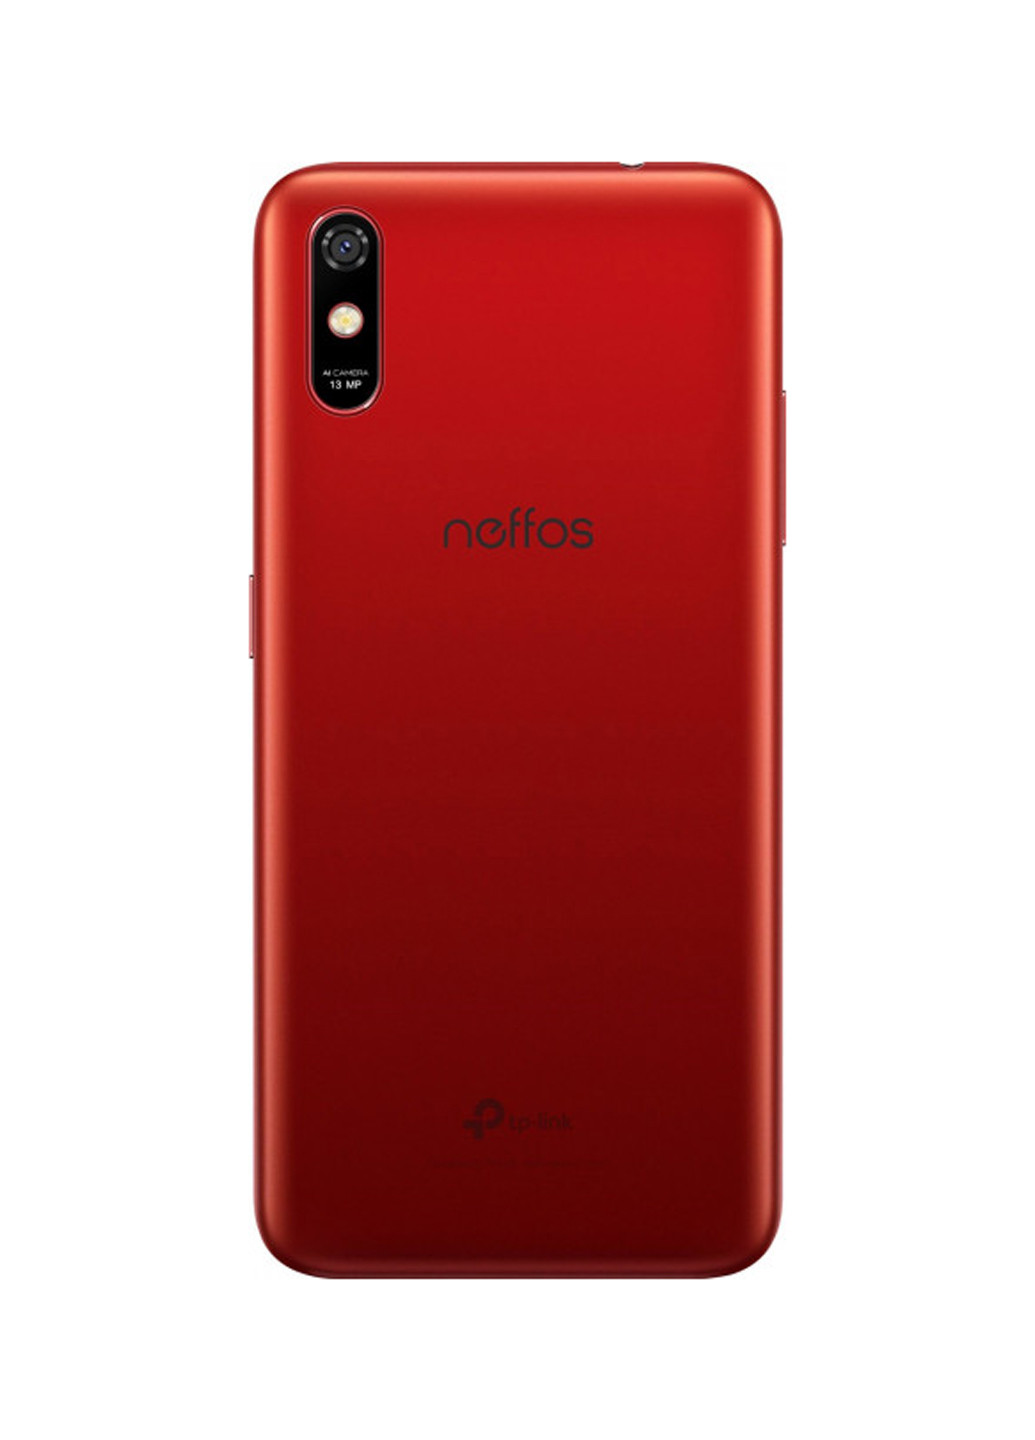 Смартфон TP-Link Neffos c9s 2/16gb red (tp7061a84) (150586719)